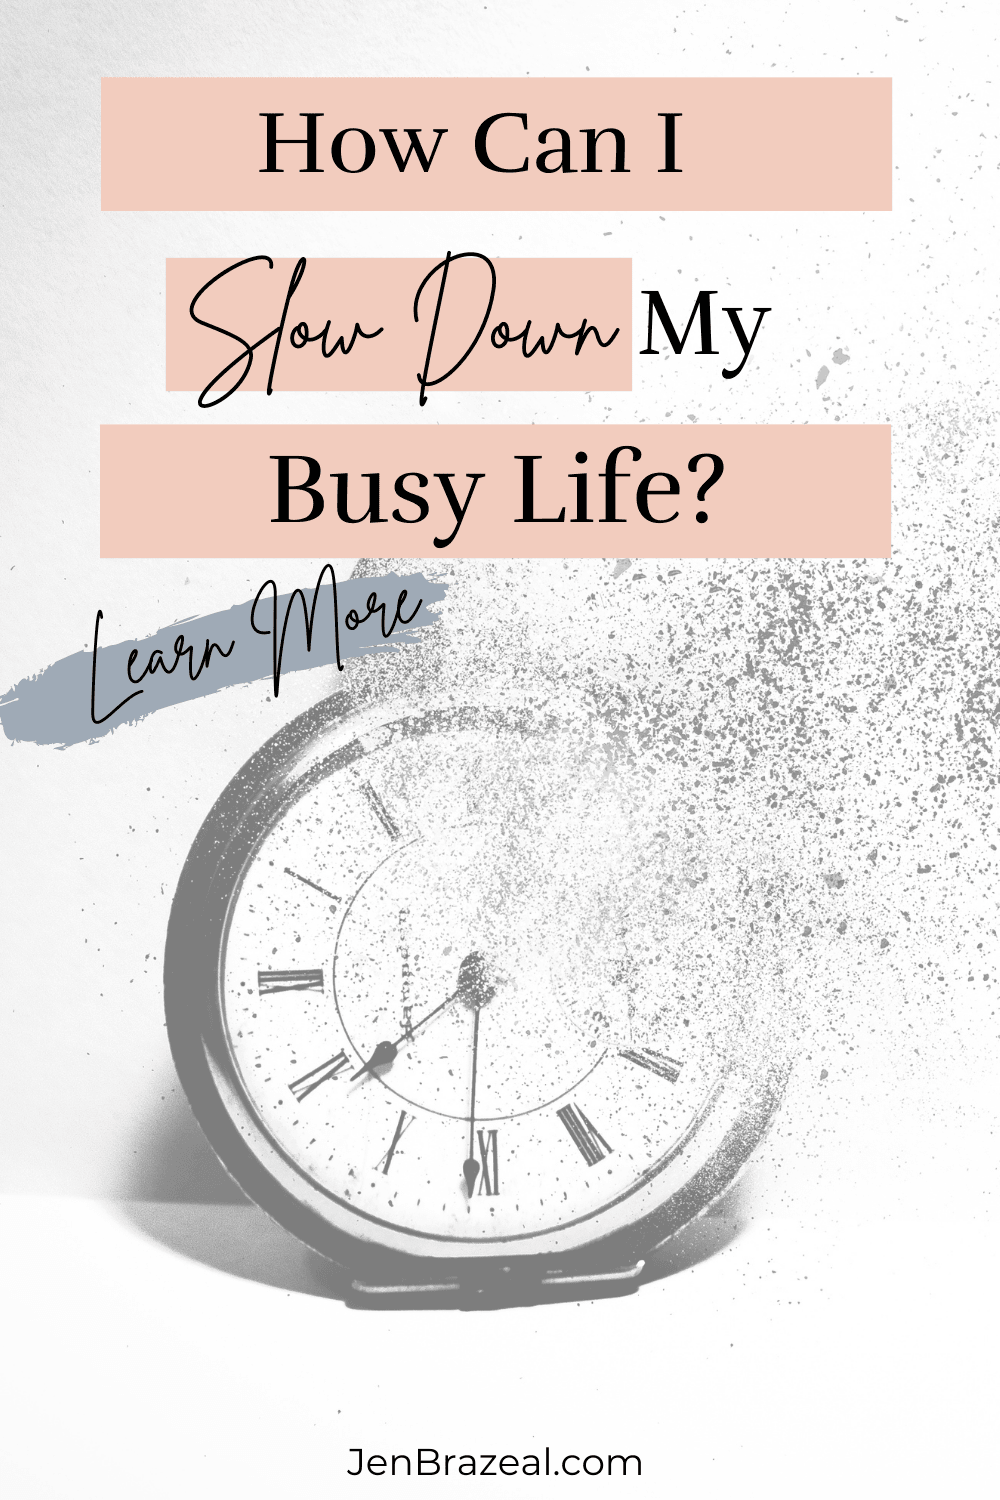 How Can I Slow Down My Busy Life? | The Unhurried Life